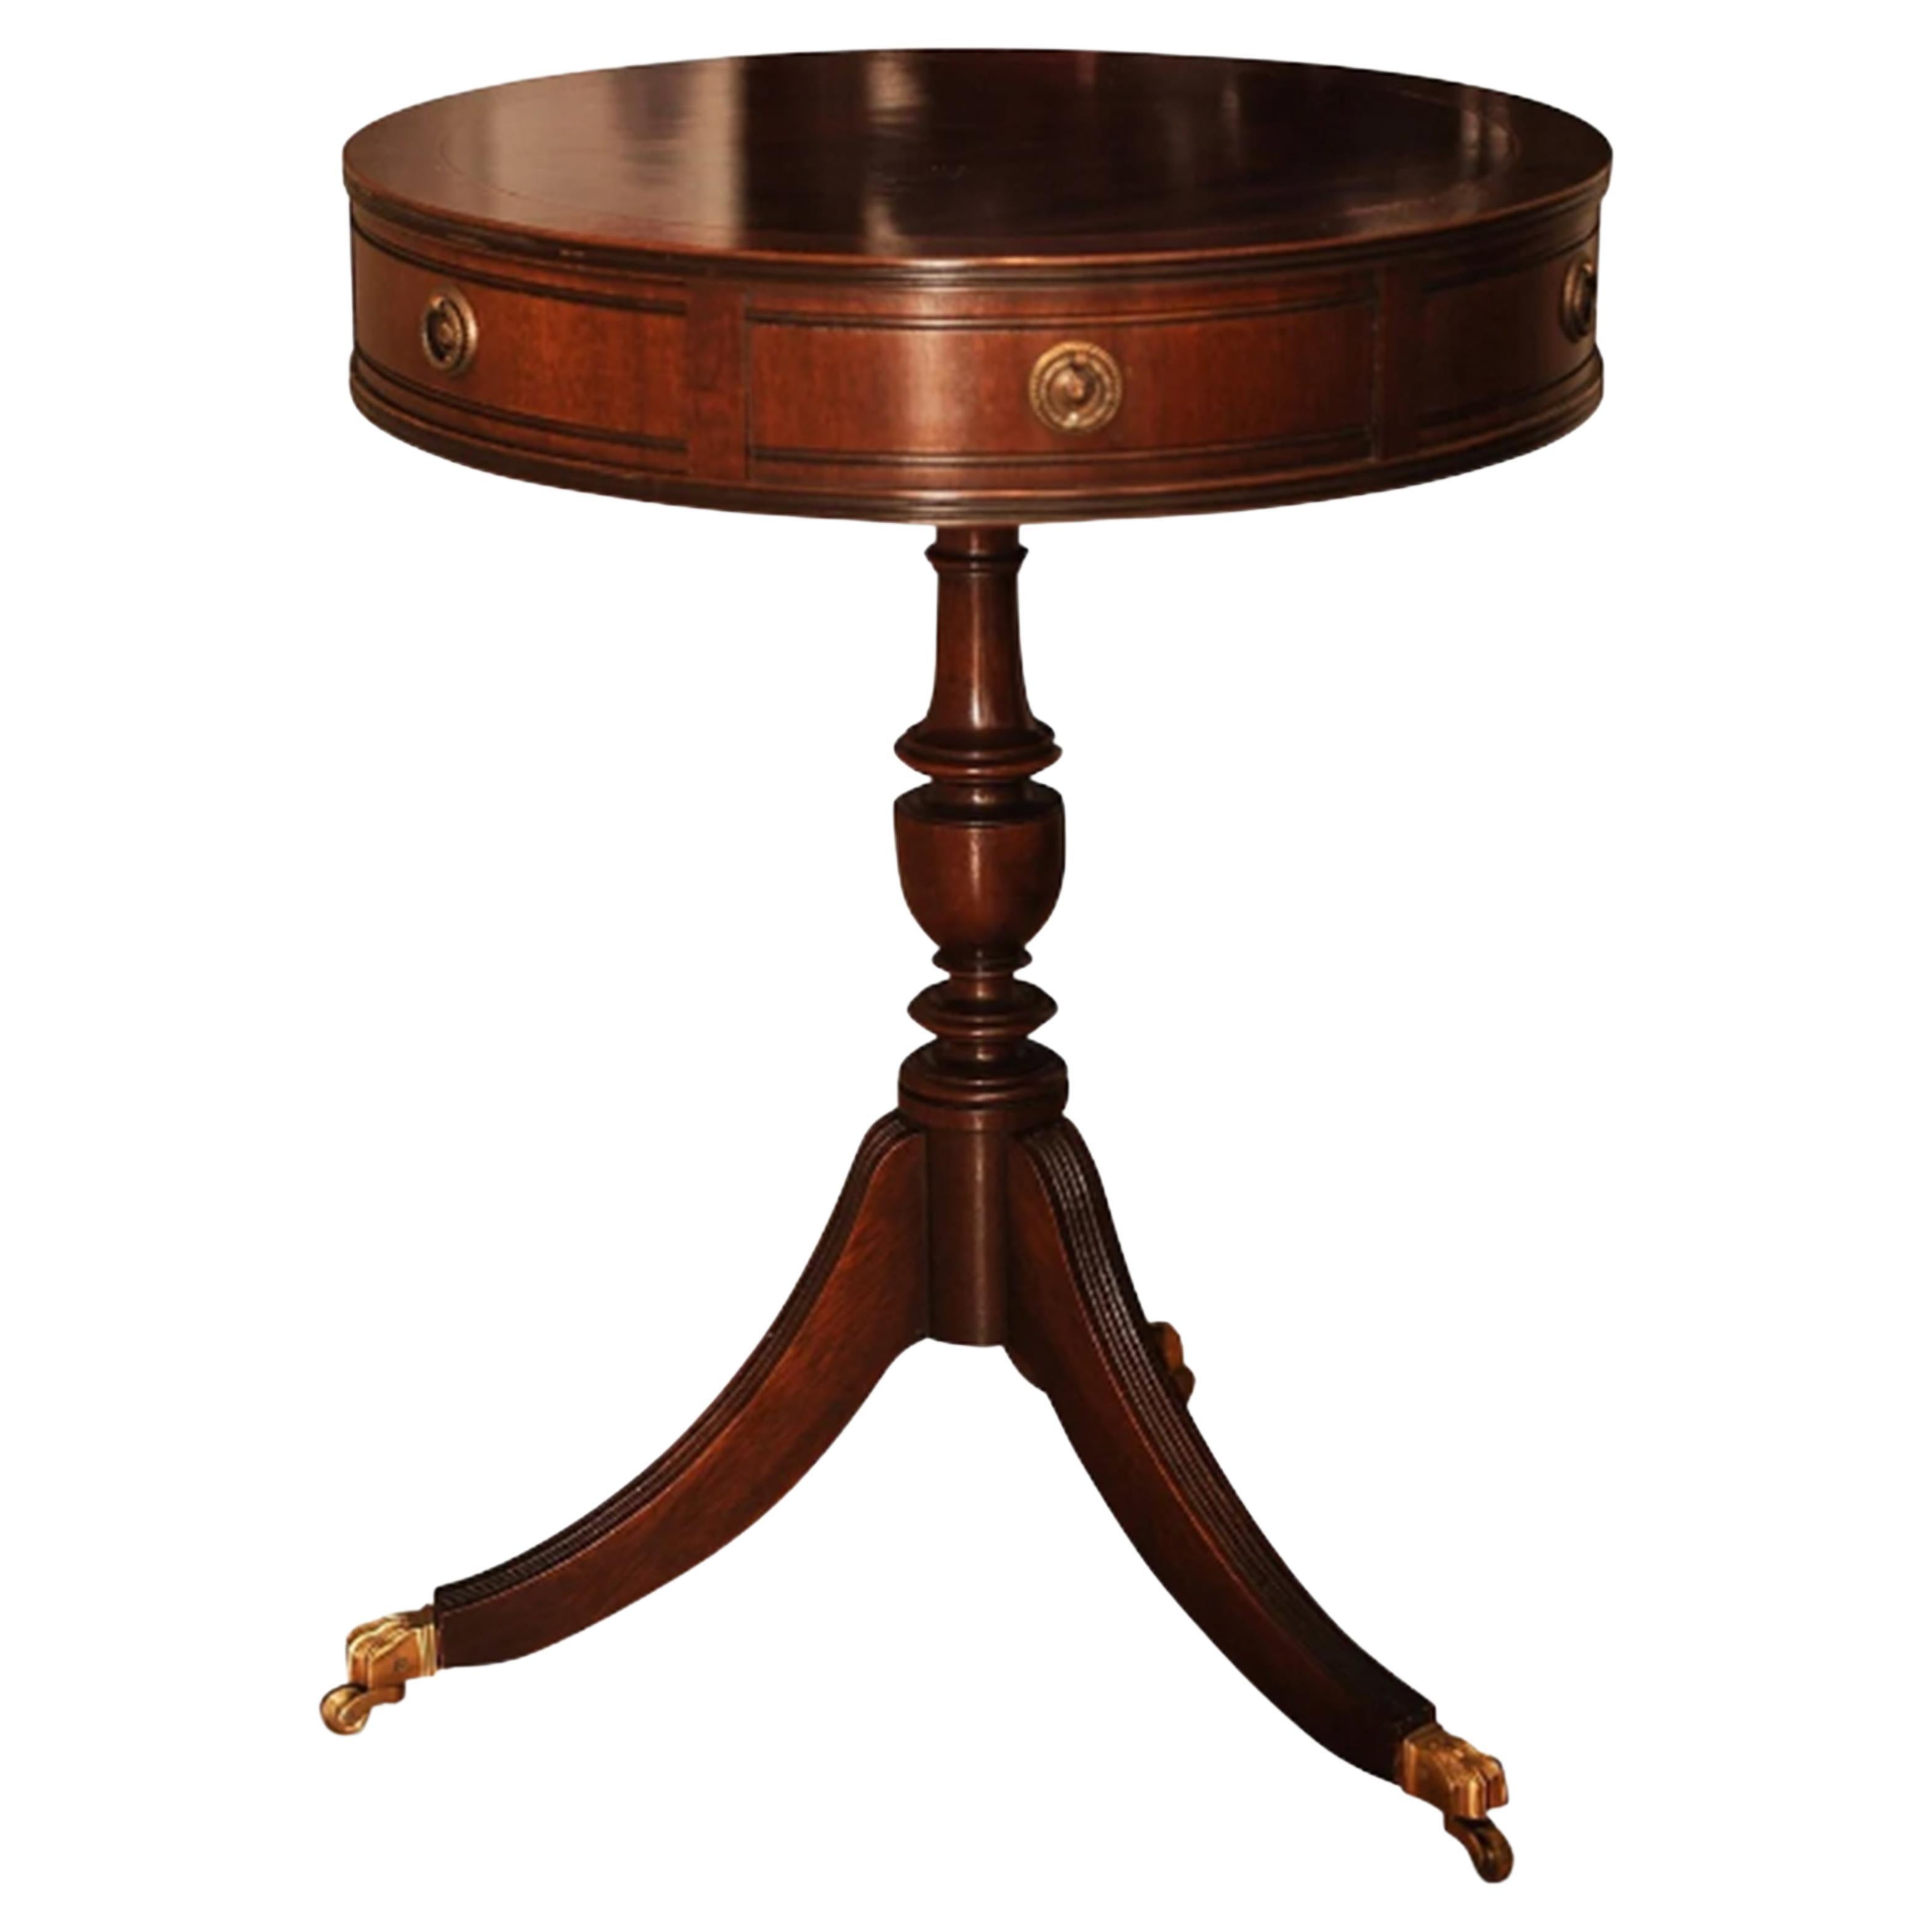 Kennedy For Harrods Regency Circular Drum Table With Brass Fixtures and Paw Feet For Sale